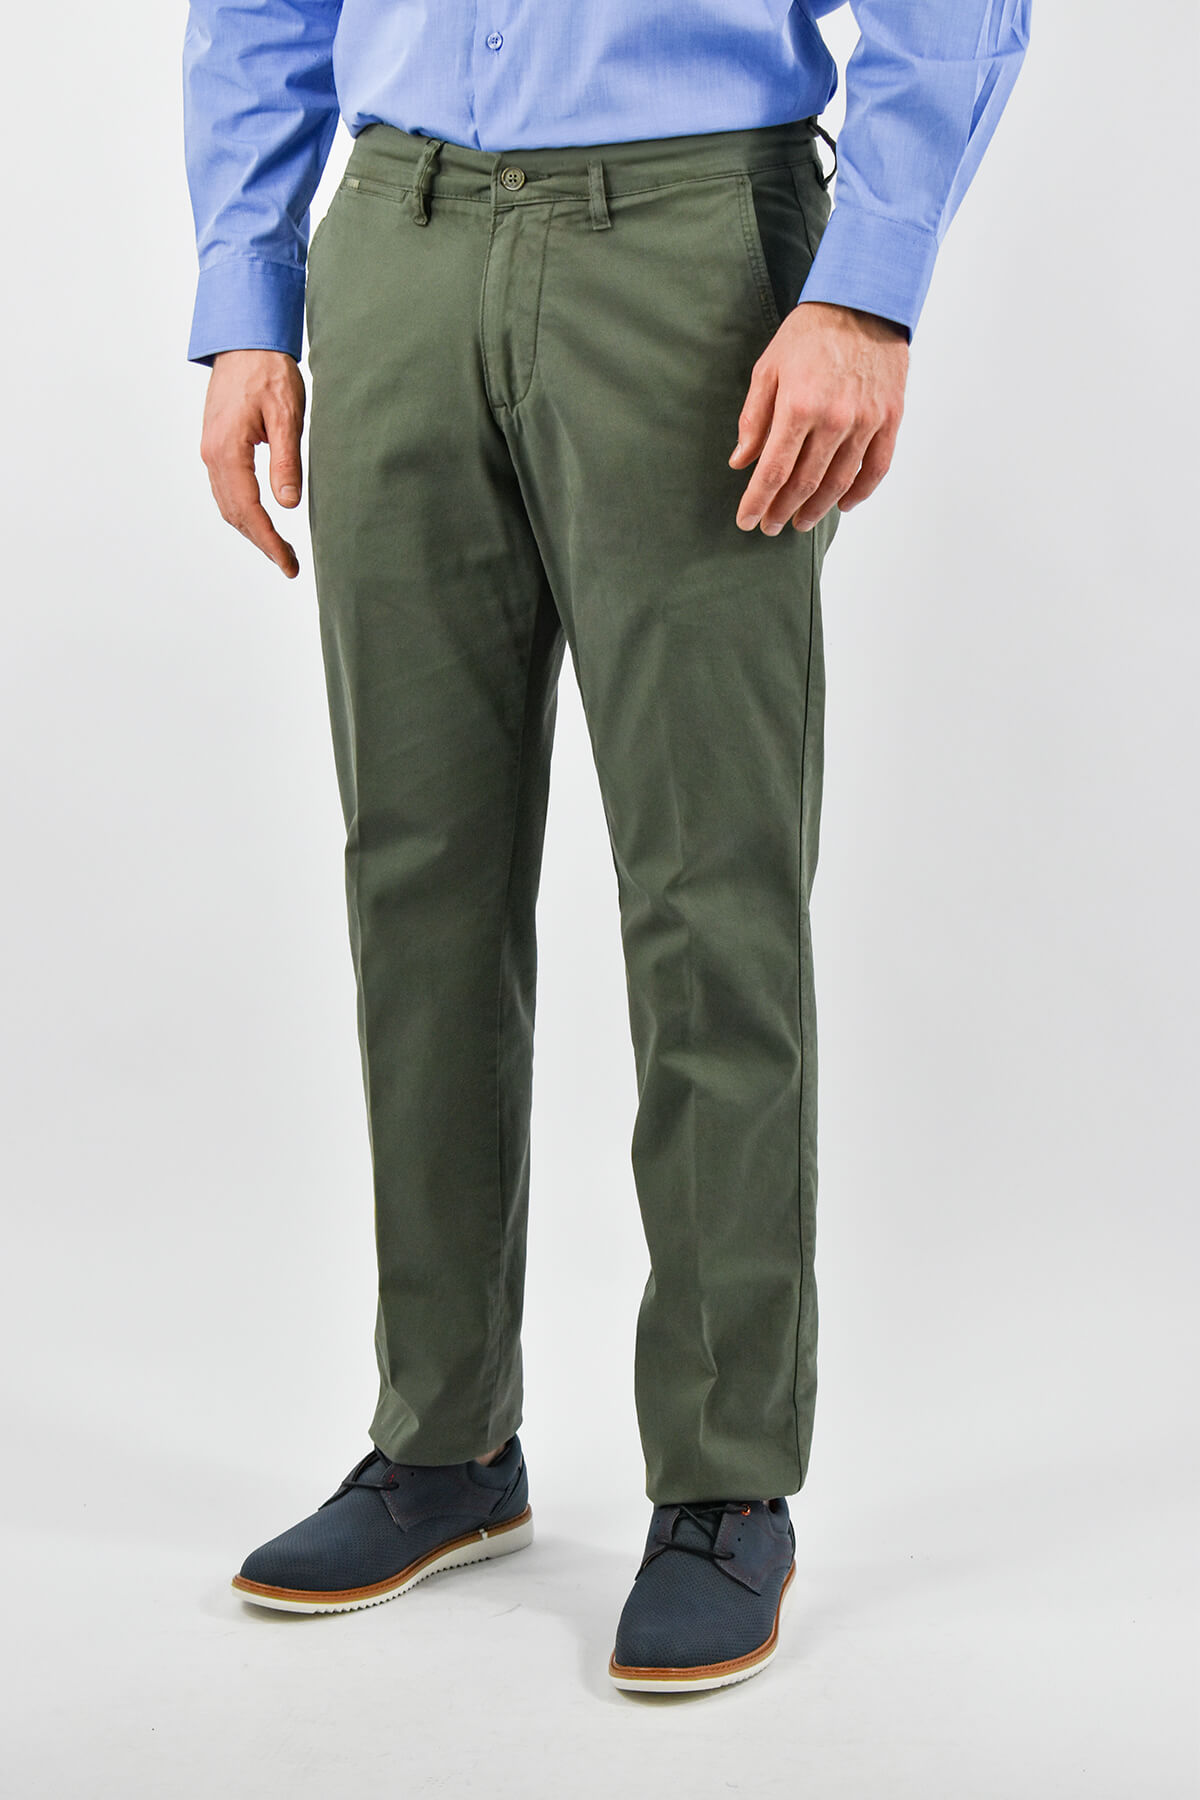 Lcdn Chinos Trousers Oporto Confort